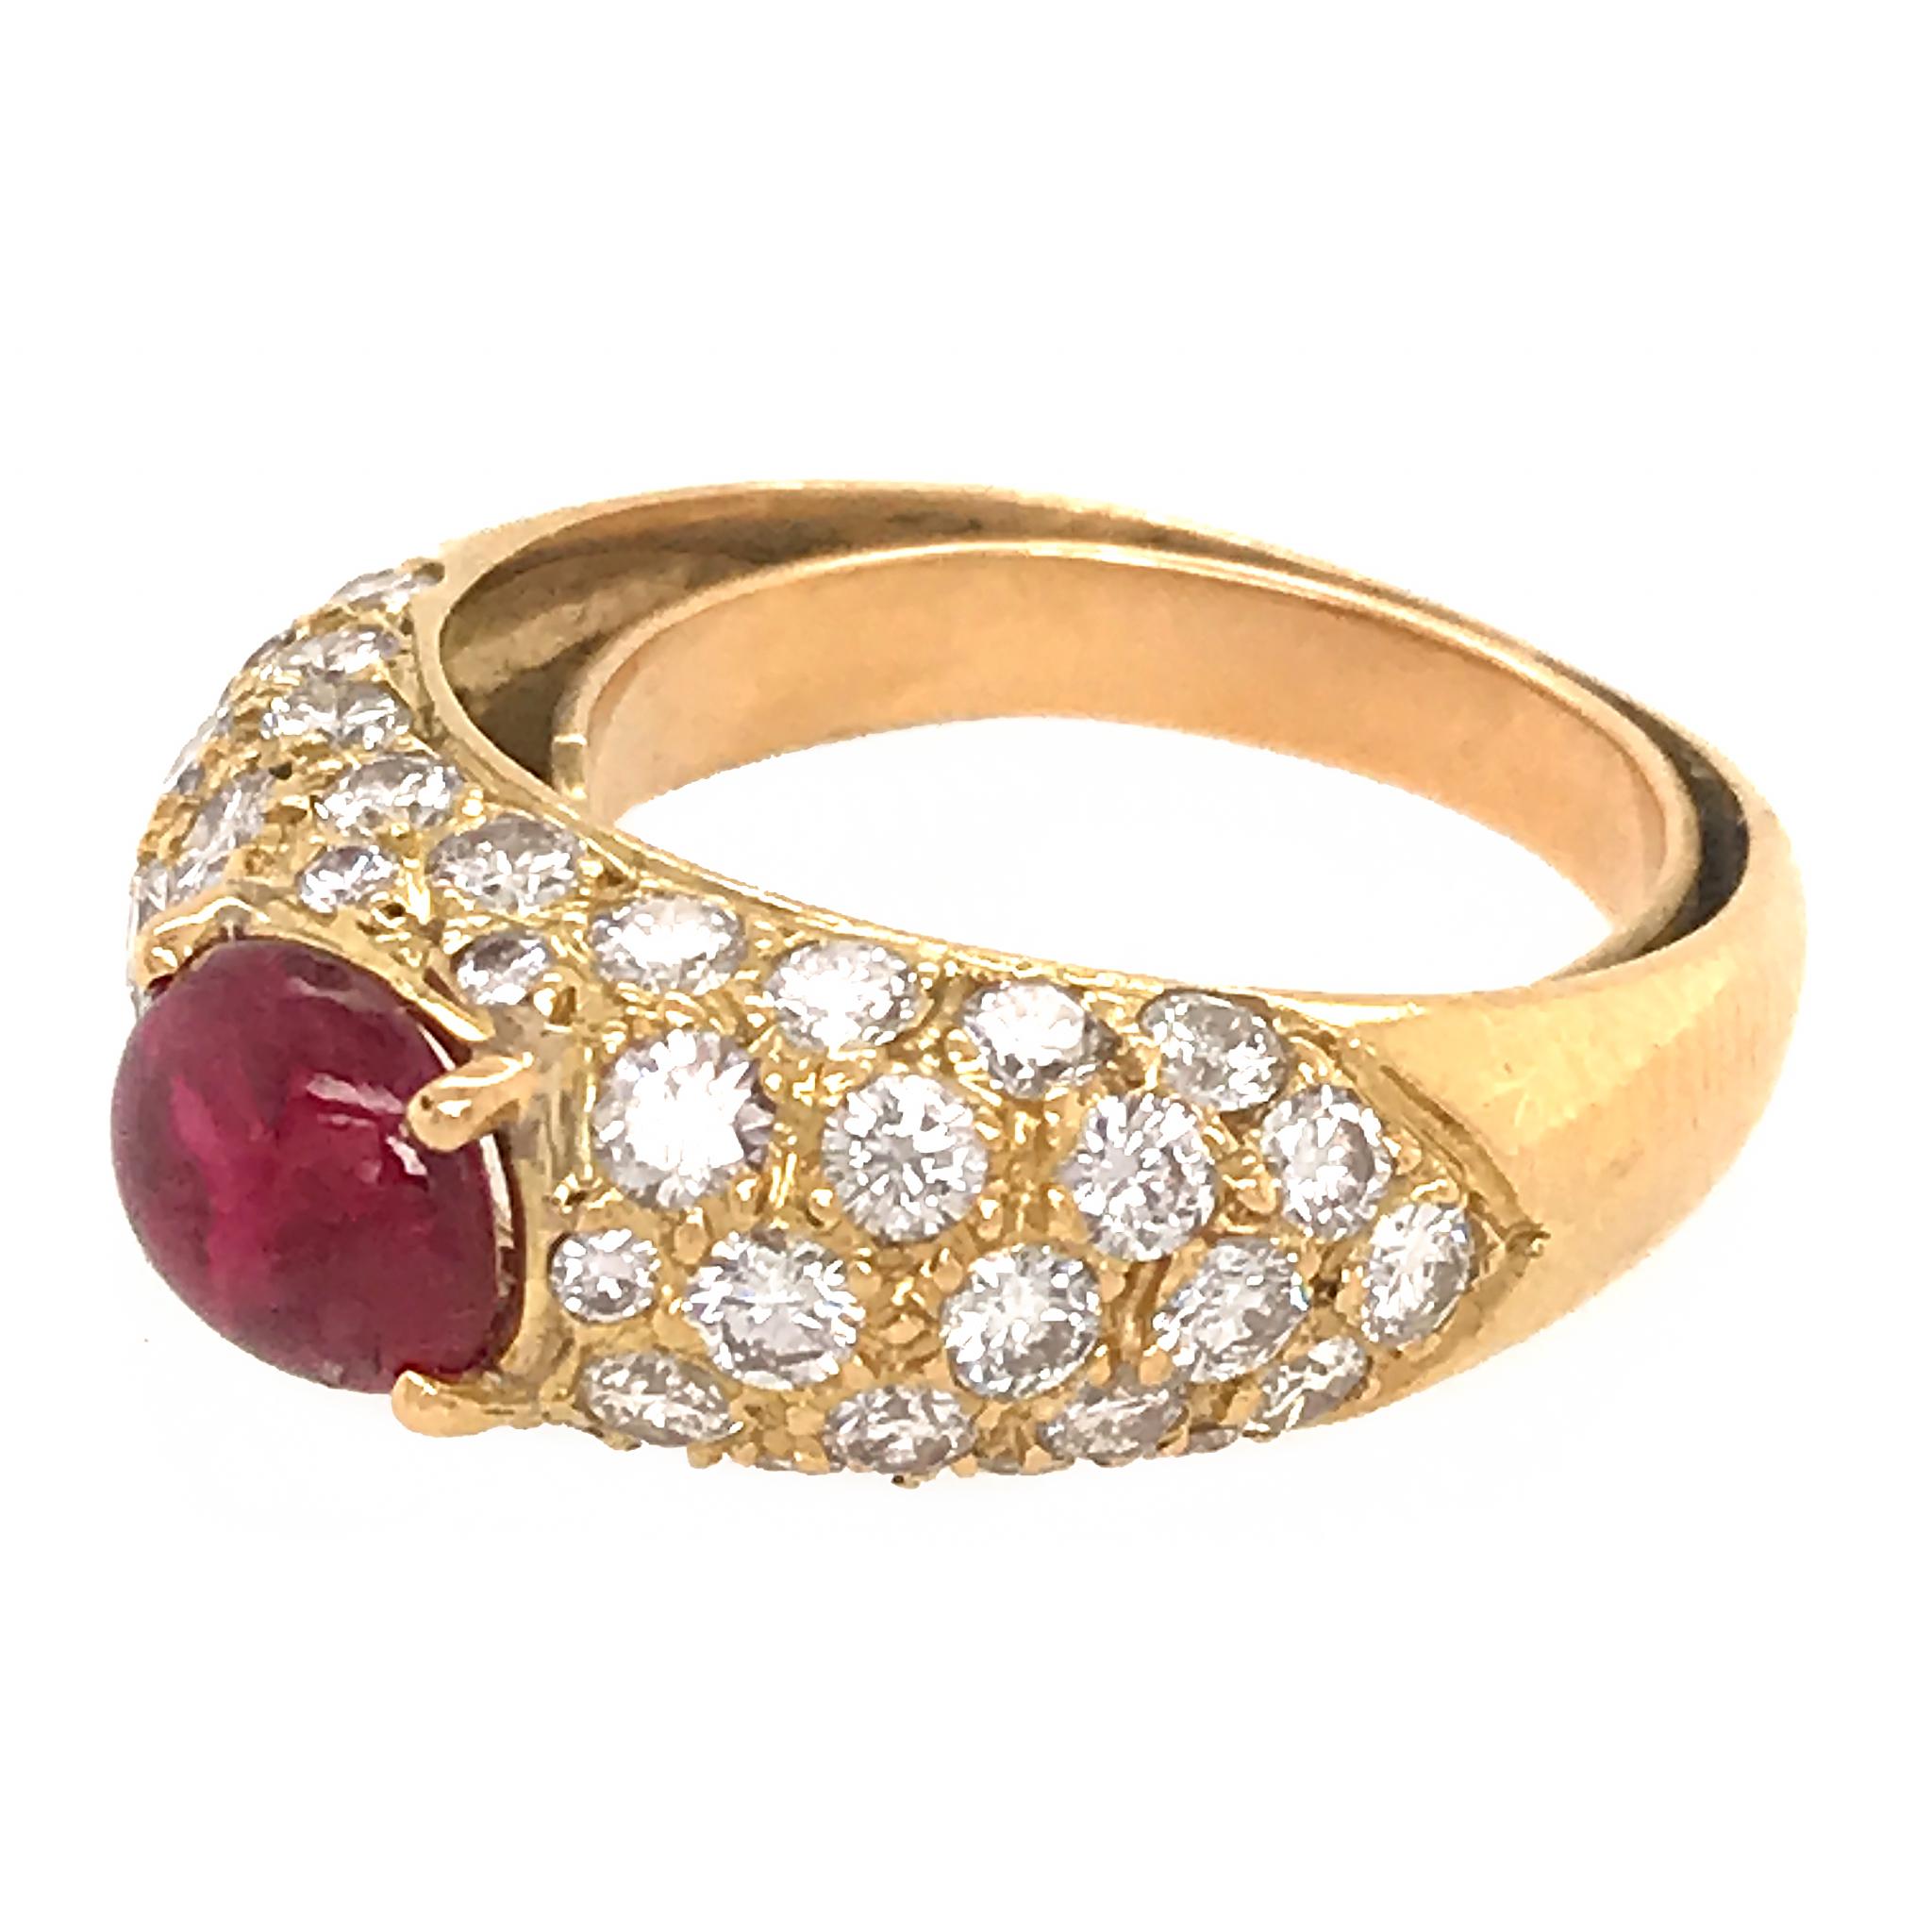 18k Yellow Gold
Diamond: 2.50 ct twd 
Color: G
Clarity: VS 
Ruby: 0.50 tcw